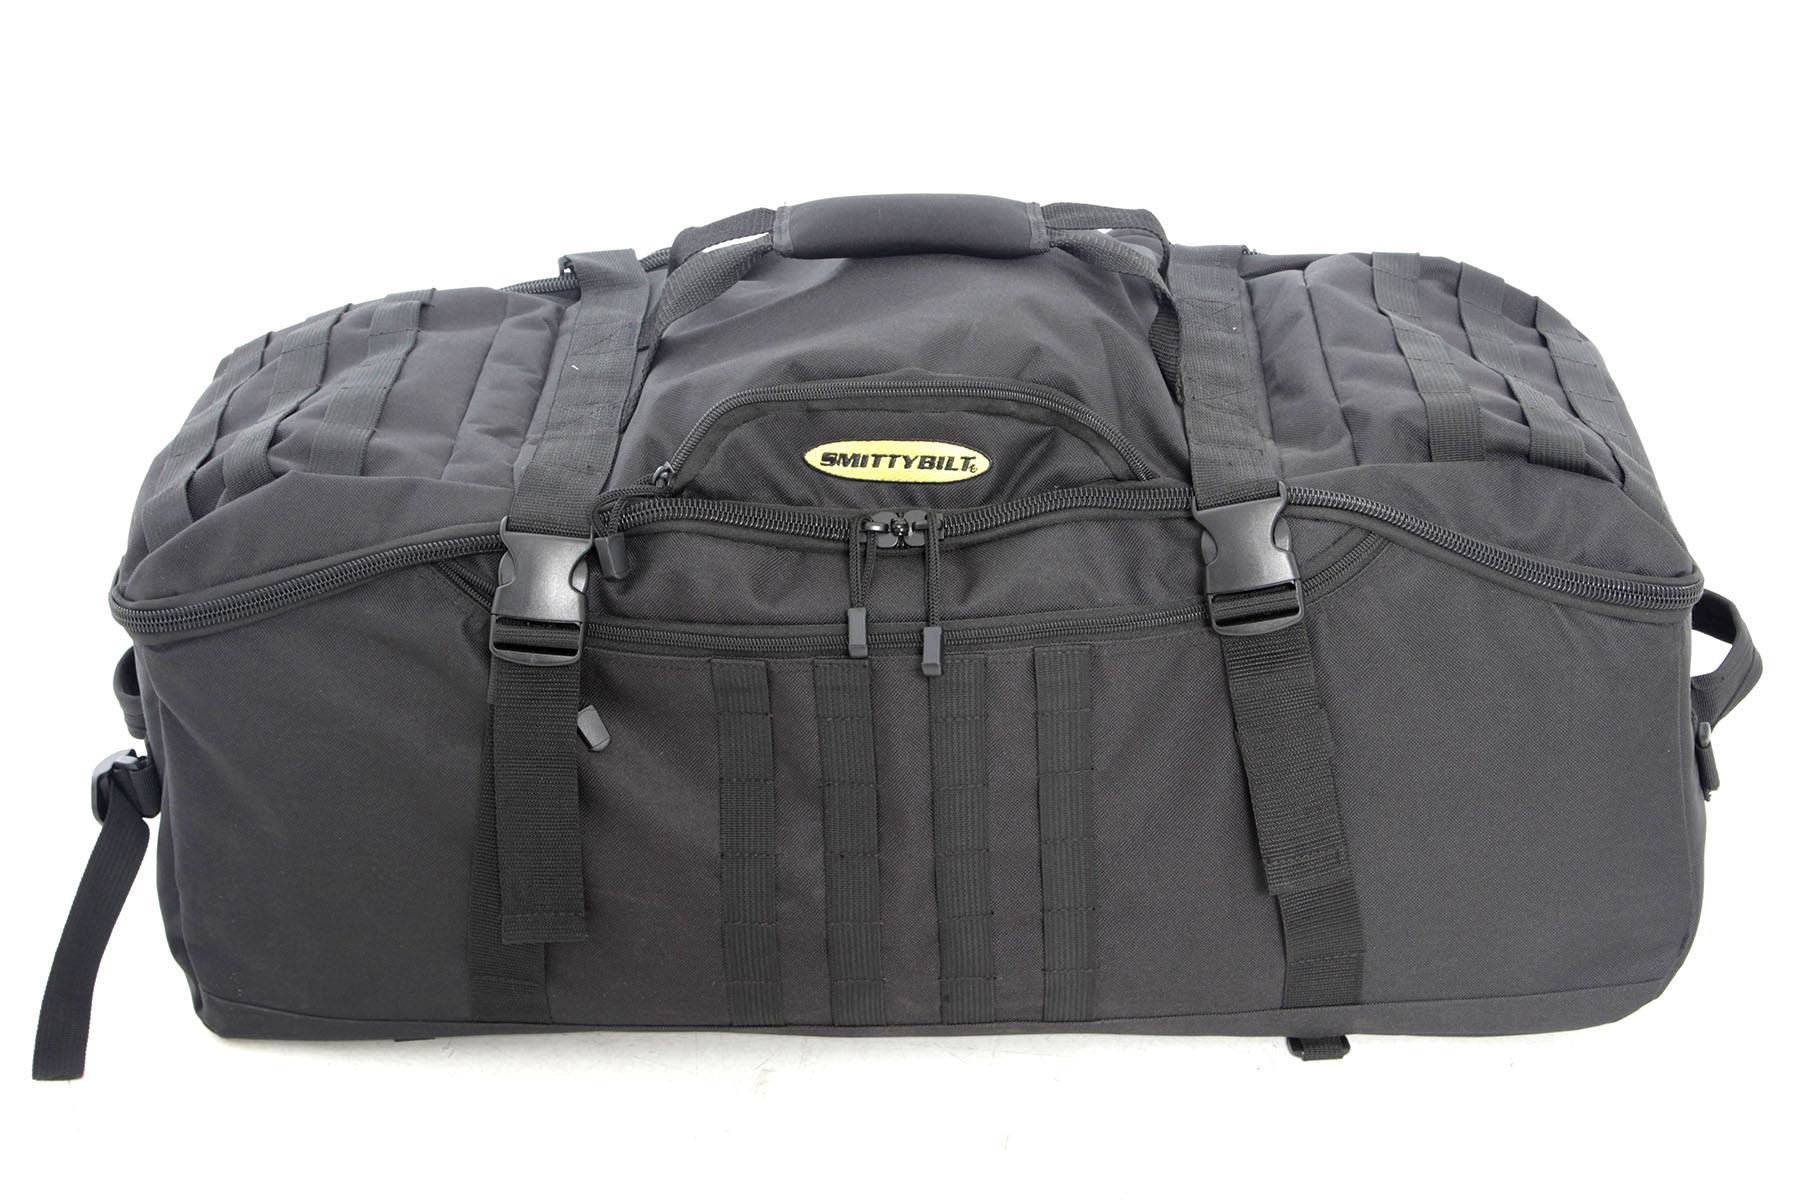 Smittybilt Trail Gear Bag with Storage Compartment